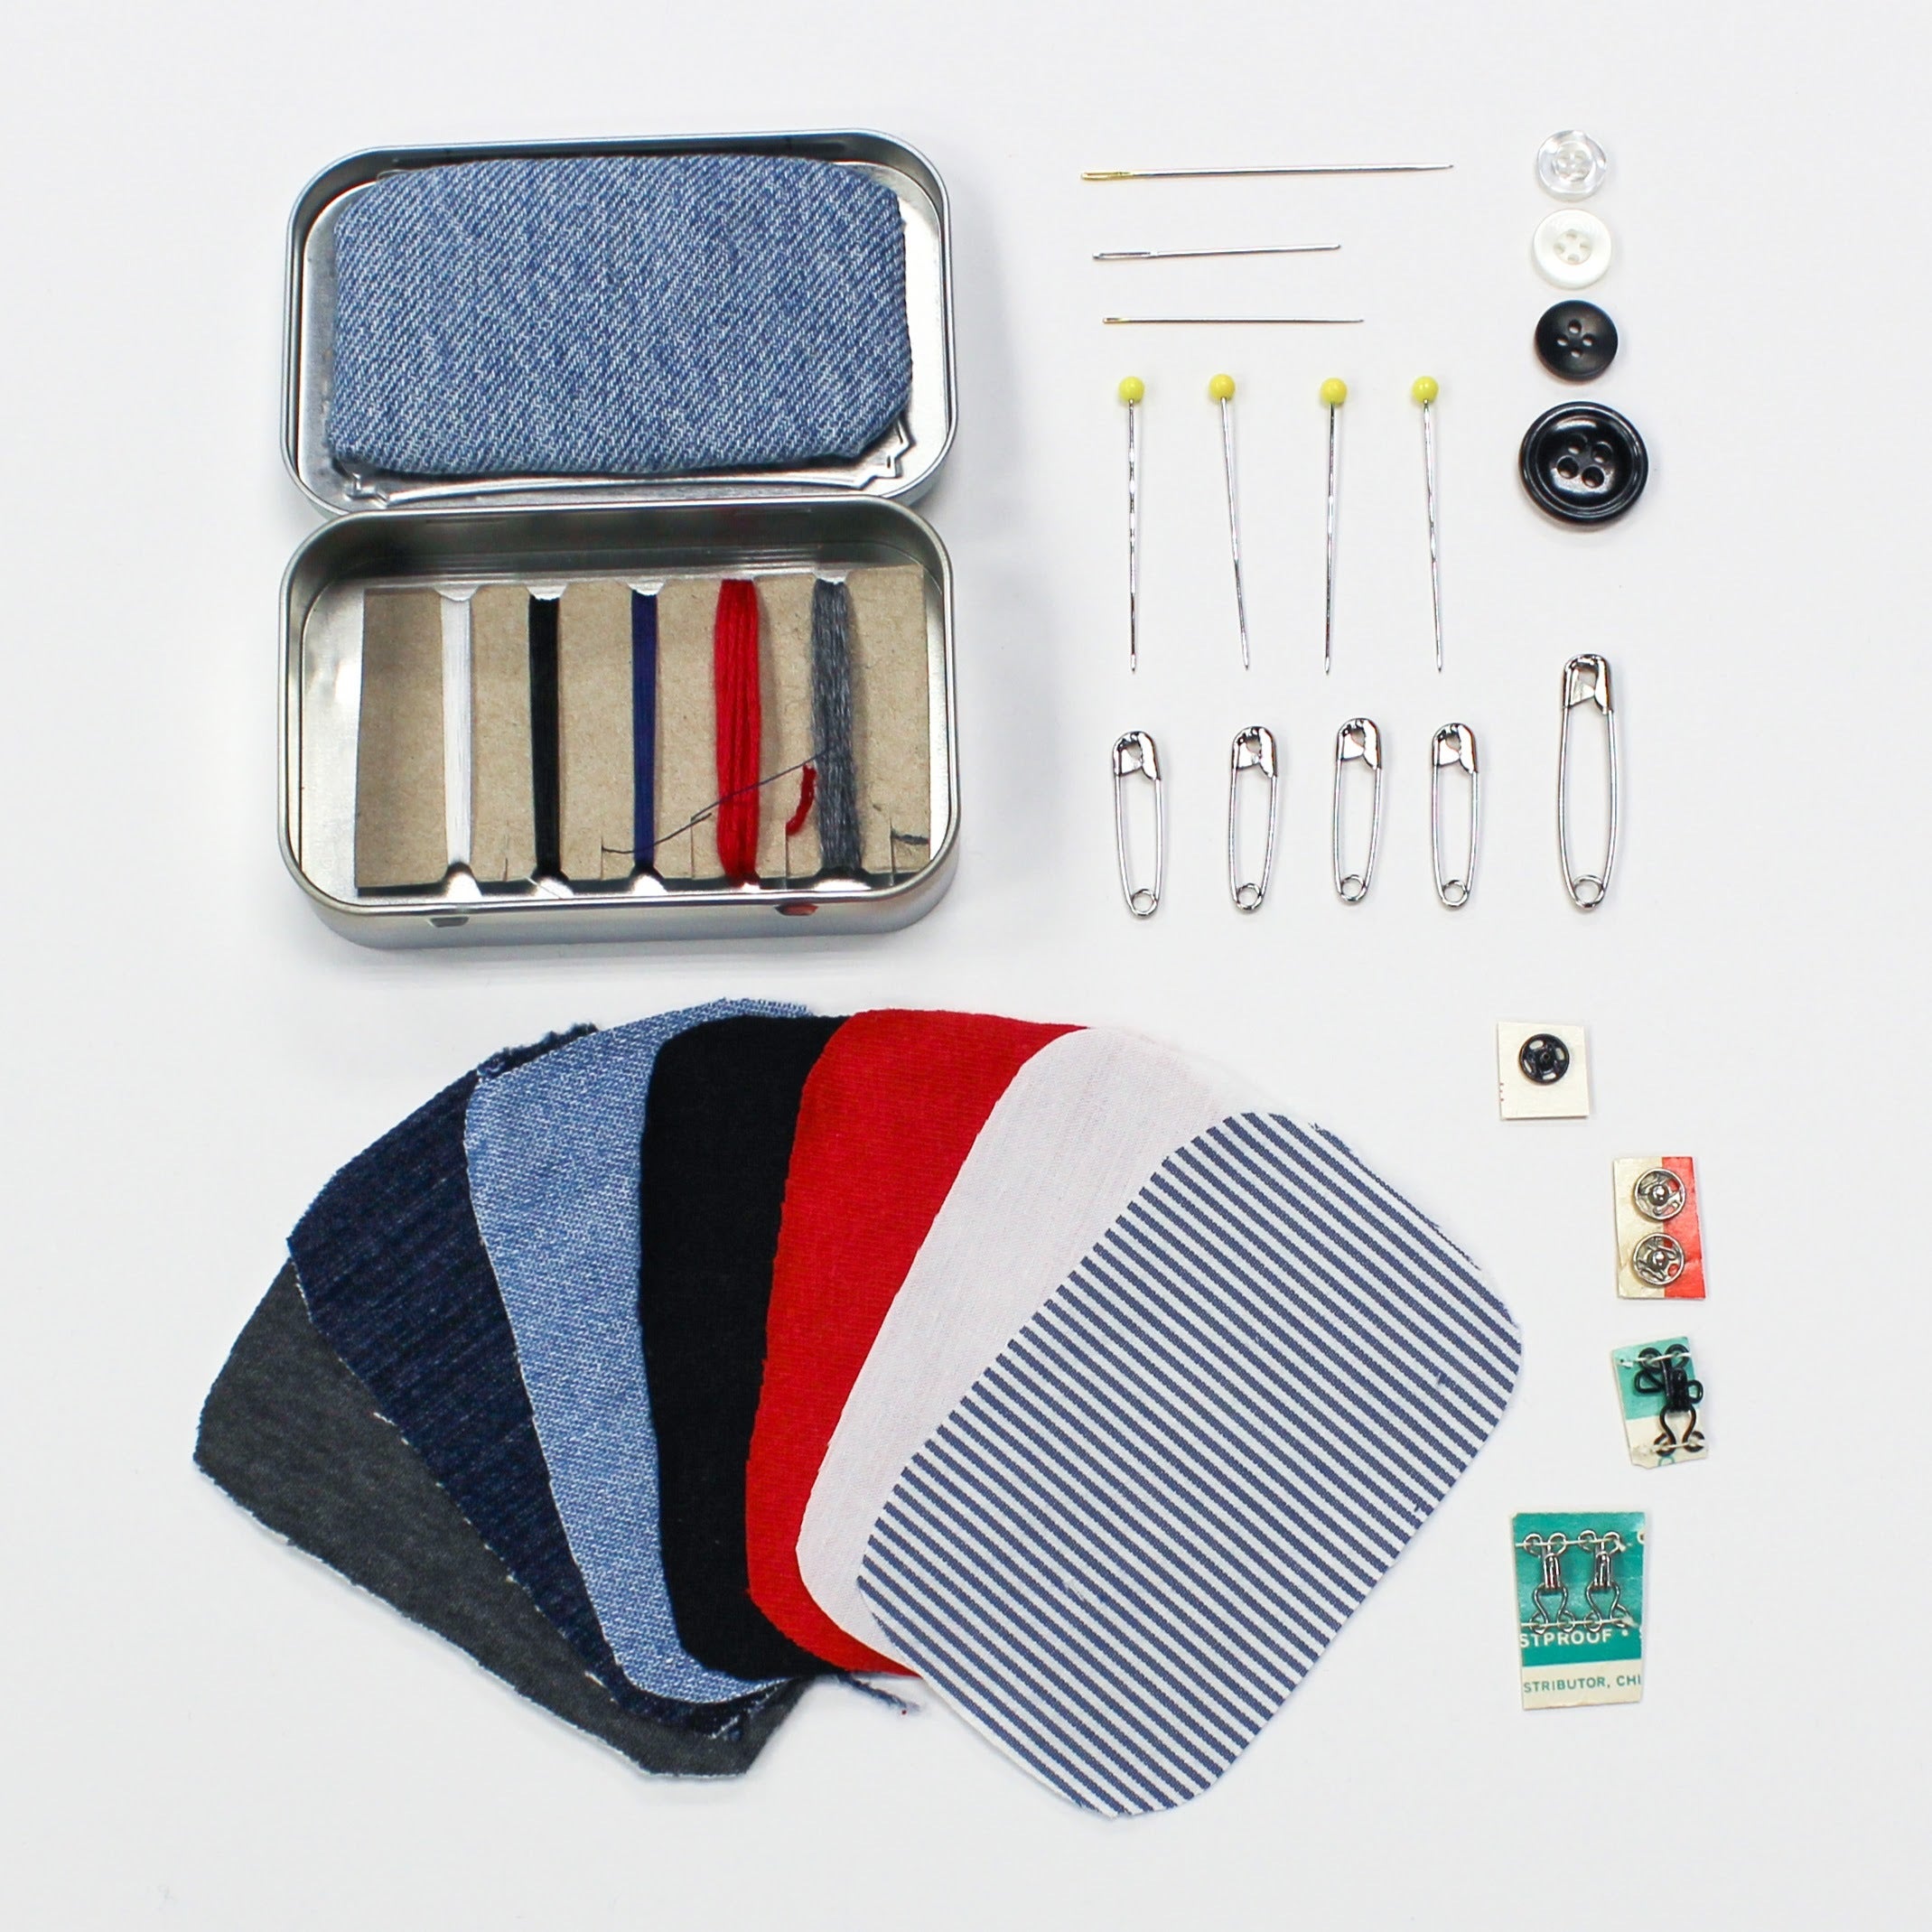 Zero waste travel mending kit! All scraps and thread are leftovers